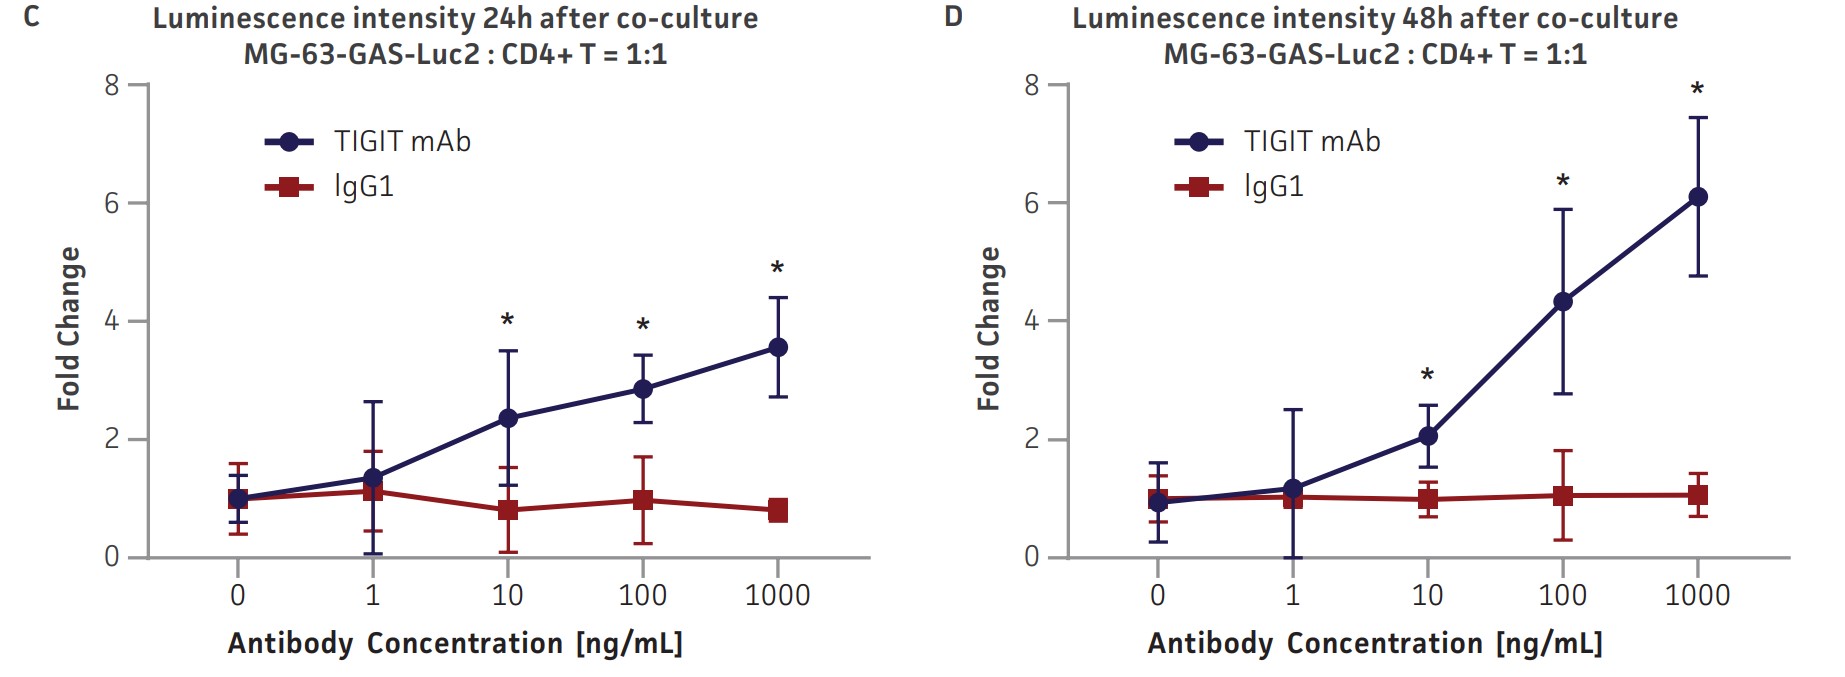 Co-culture of GAS-Luc2 cell lines with primary human immune cells